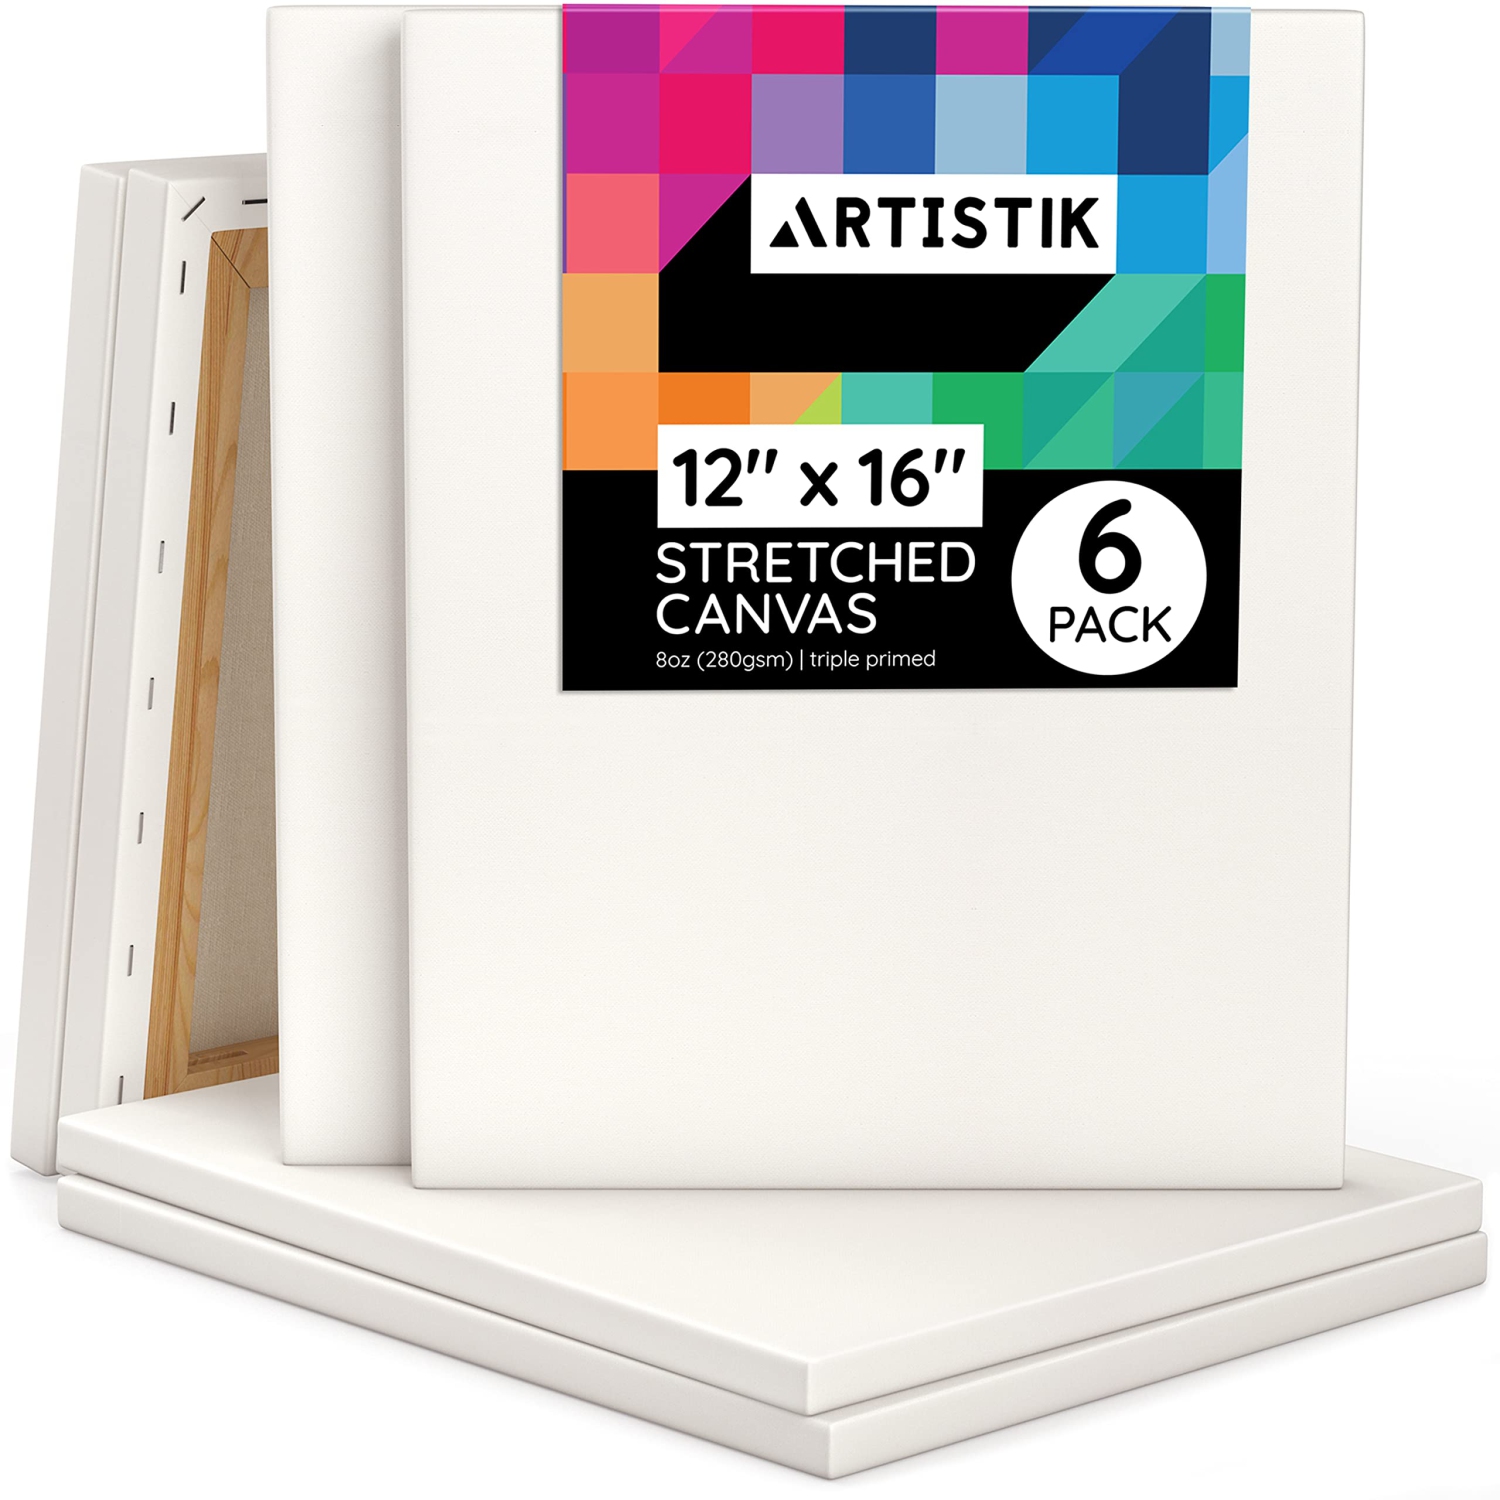 Premium Artist Stretched Canvas - 100% Cotton, Acid-Free, Triple Primed Gesso - Pack of 6 Canvases (16x12 inches) - Art Paint Supply